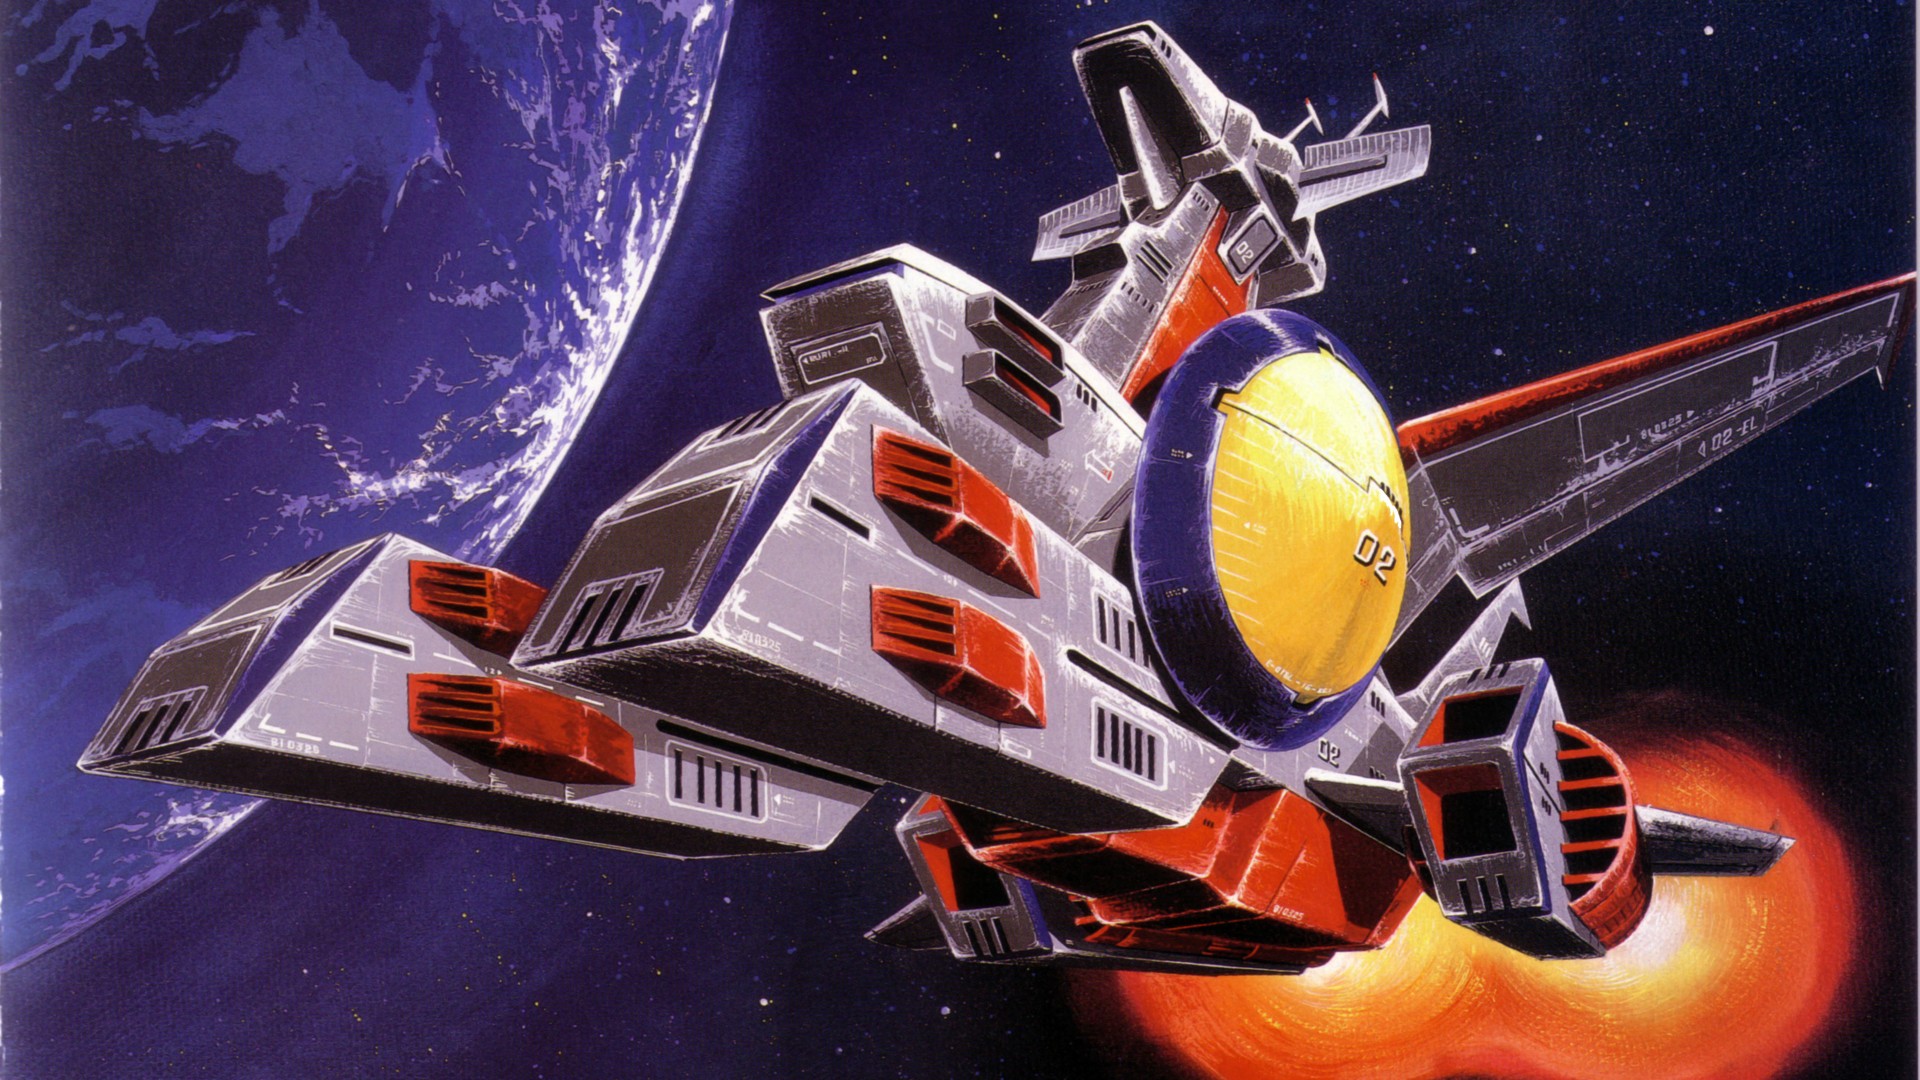 Mark on Twitter SciFiHour another one of many cool anime spaceships  the Nadesico scifihour httpstcoX2toMsiwLx  X